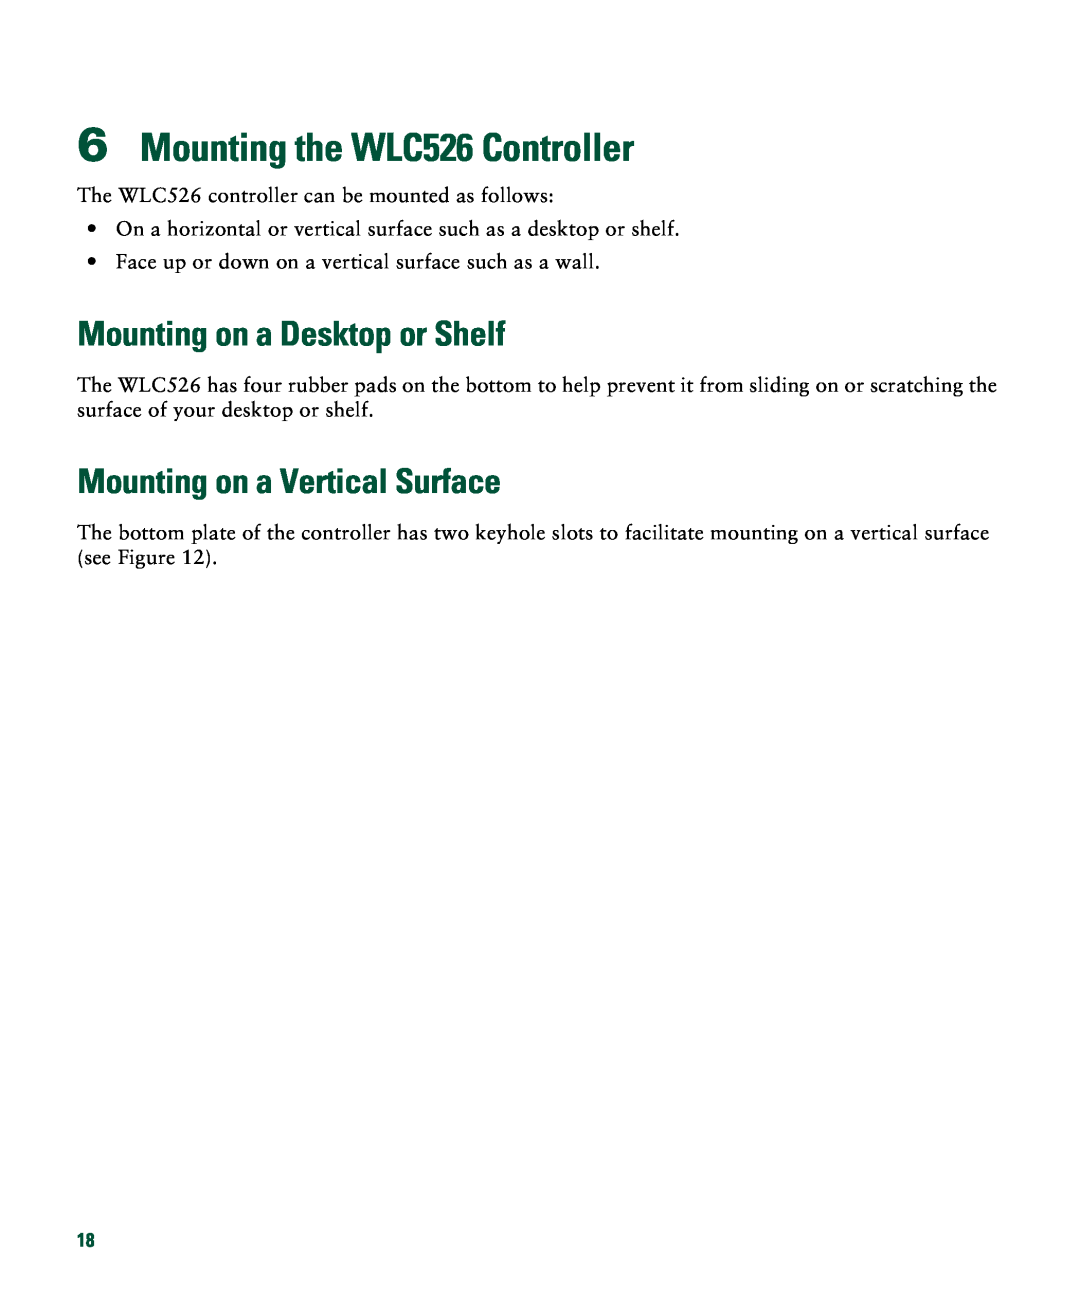 Cisco Systems quick start Mounting the WLC526 Controller, Mounting on a Desktop or Shelf, Mounting on a Vertical Surface 